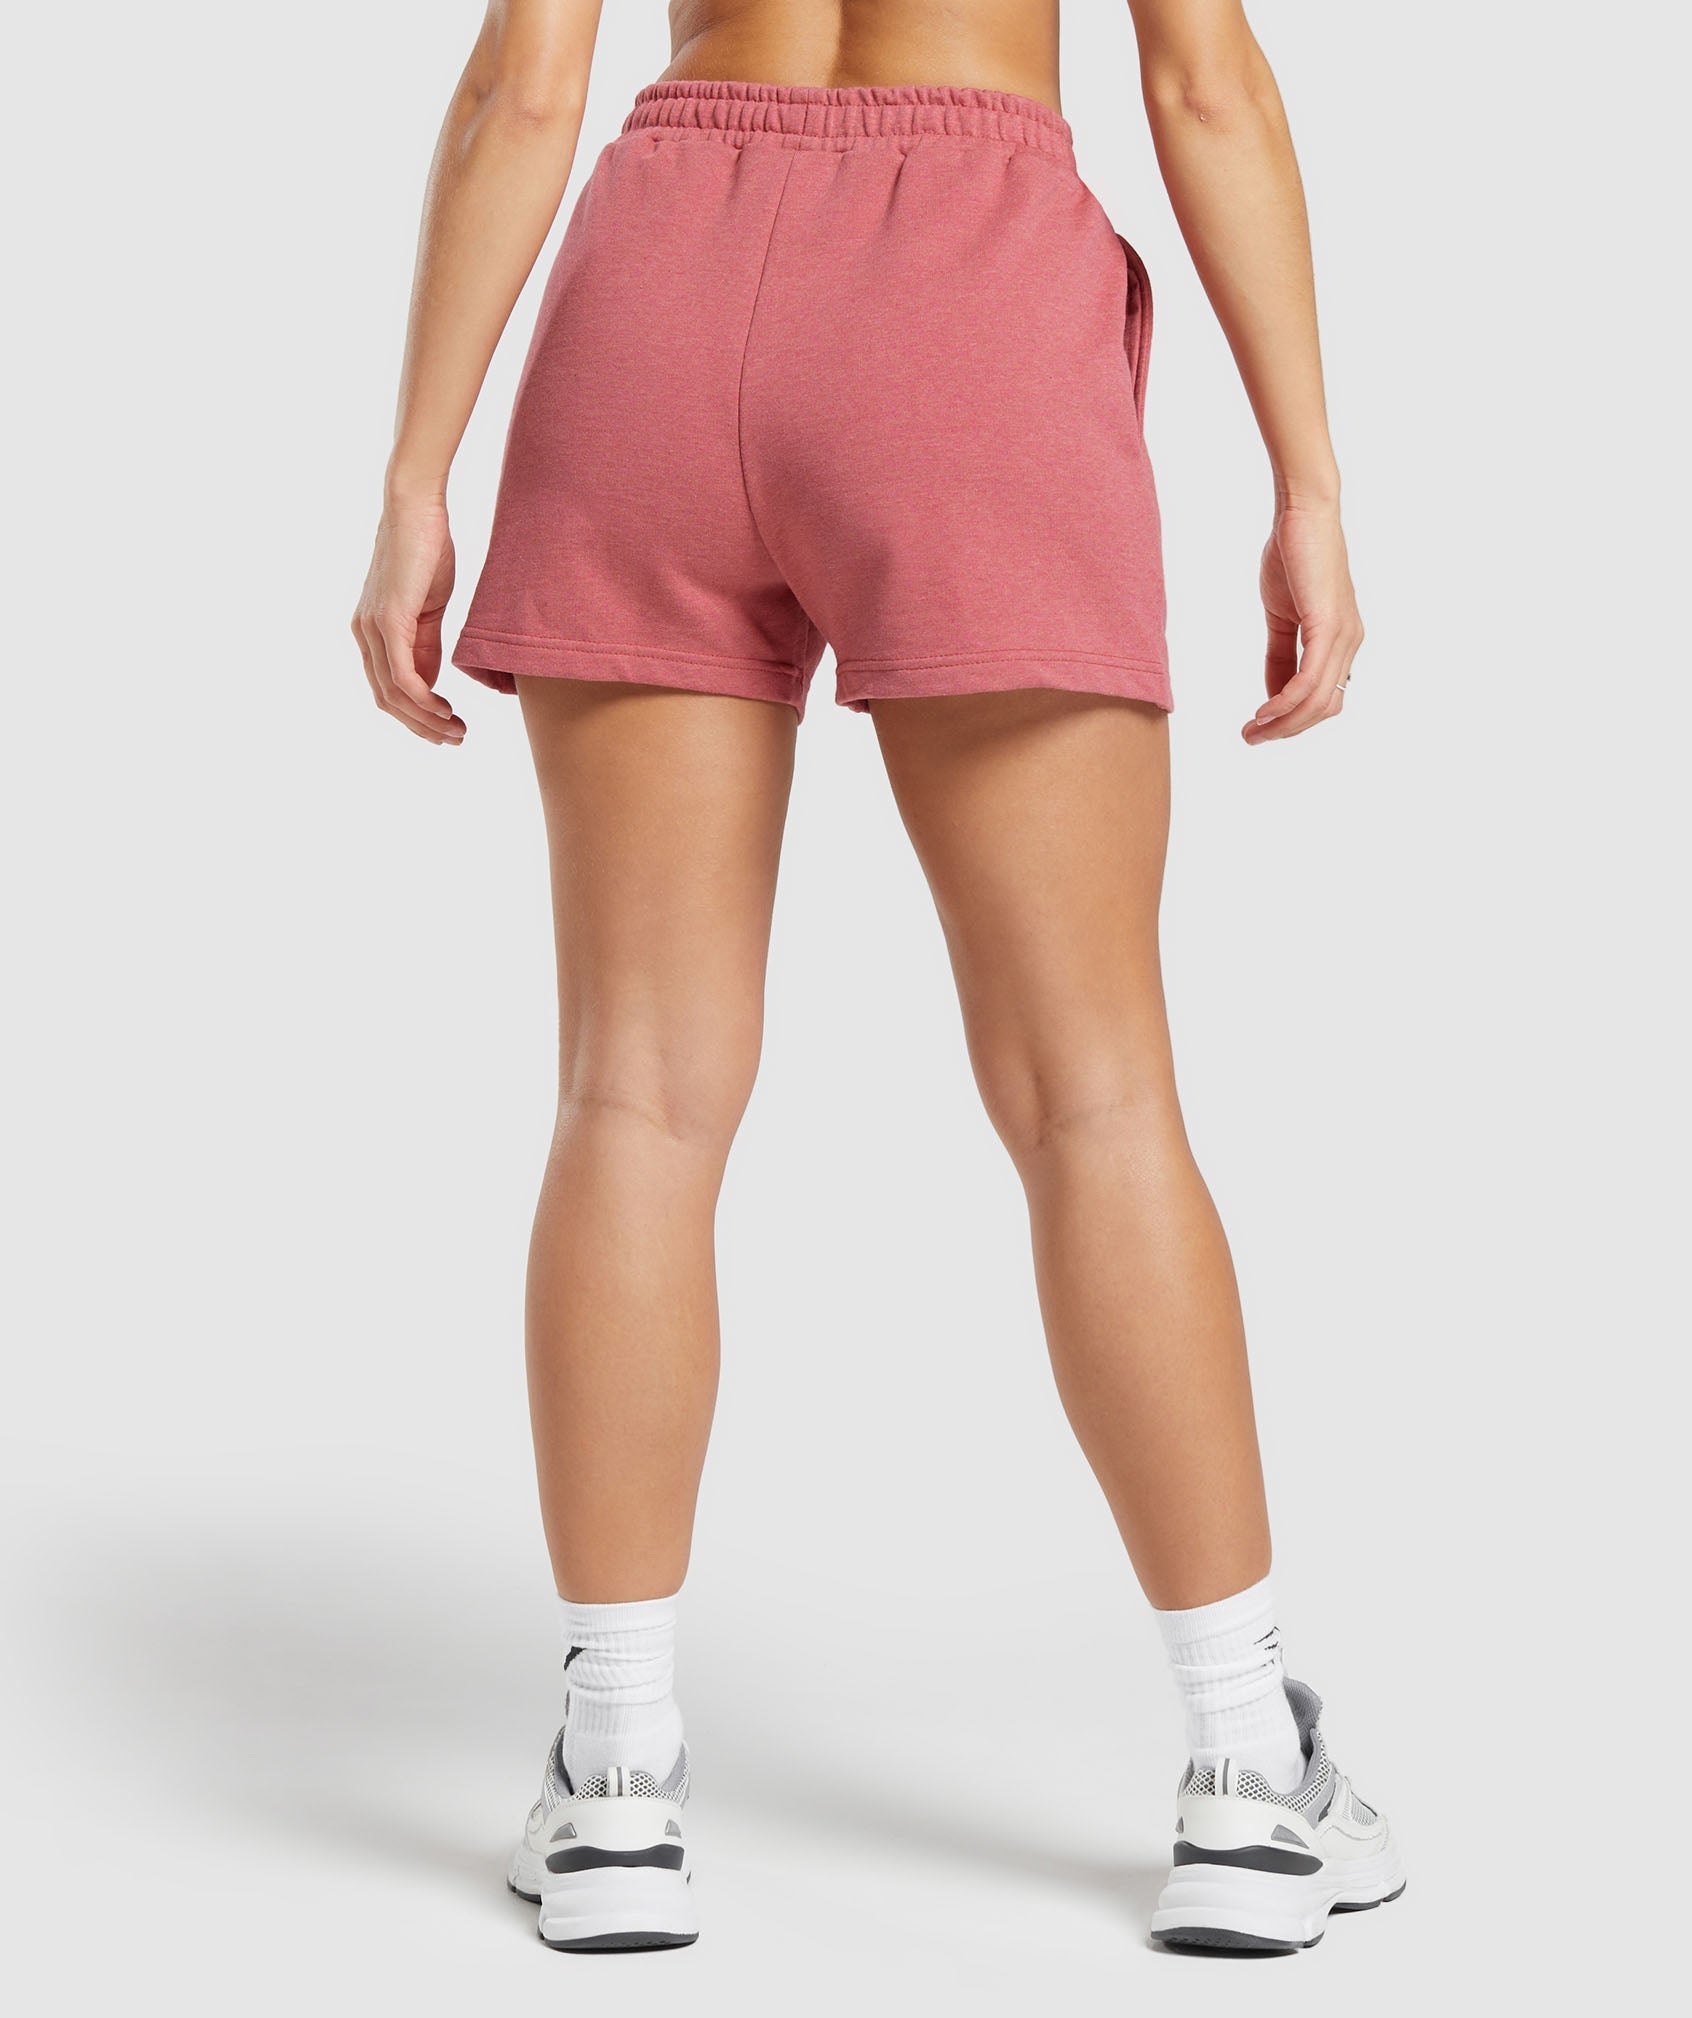 Rest Day Sweat Shorts in Heritage Pink Marl - view 2